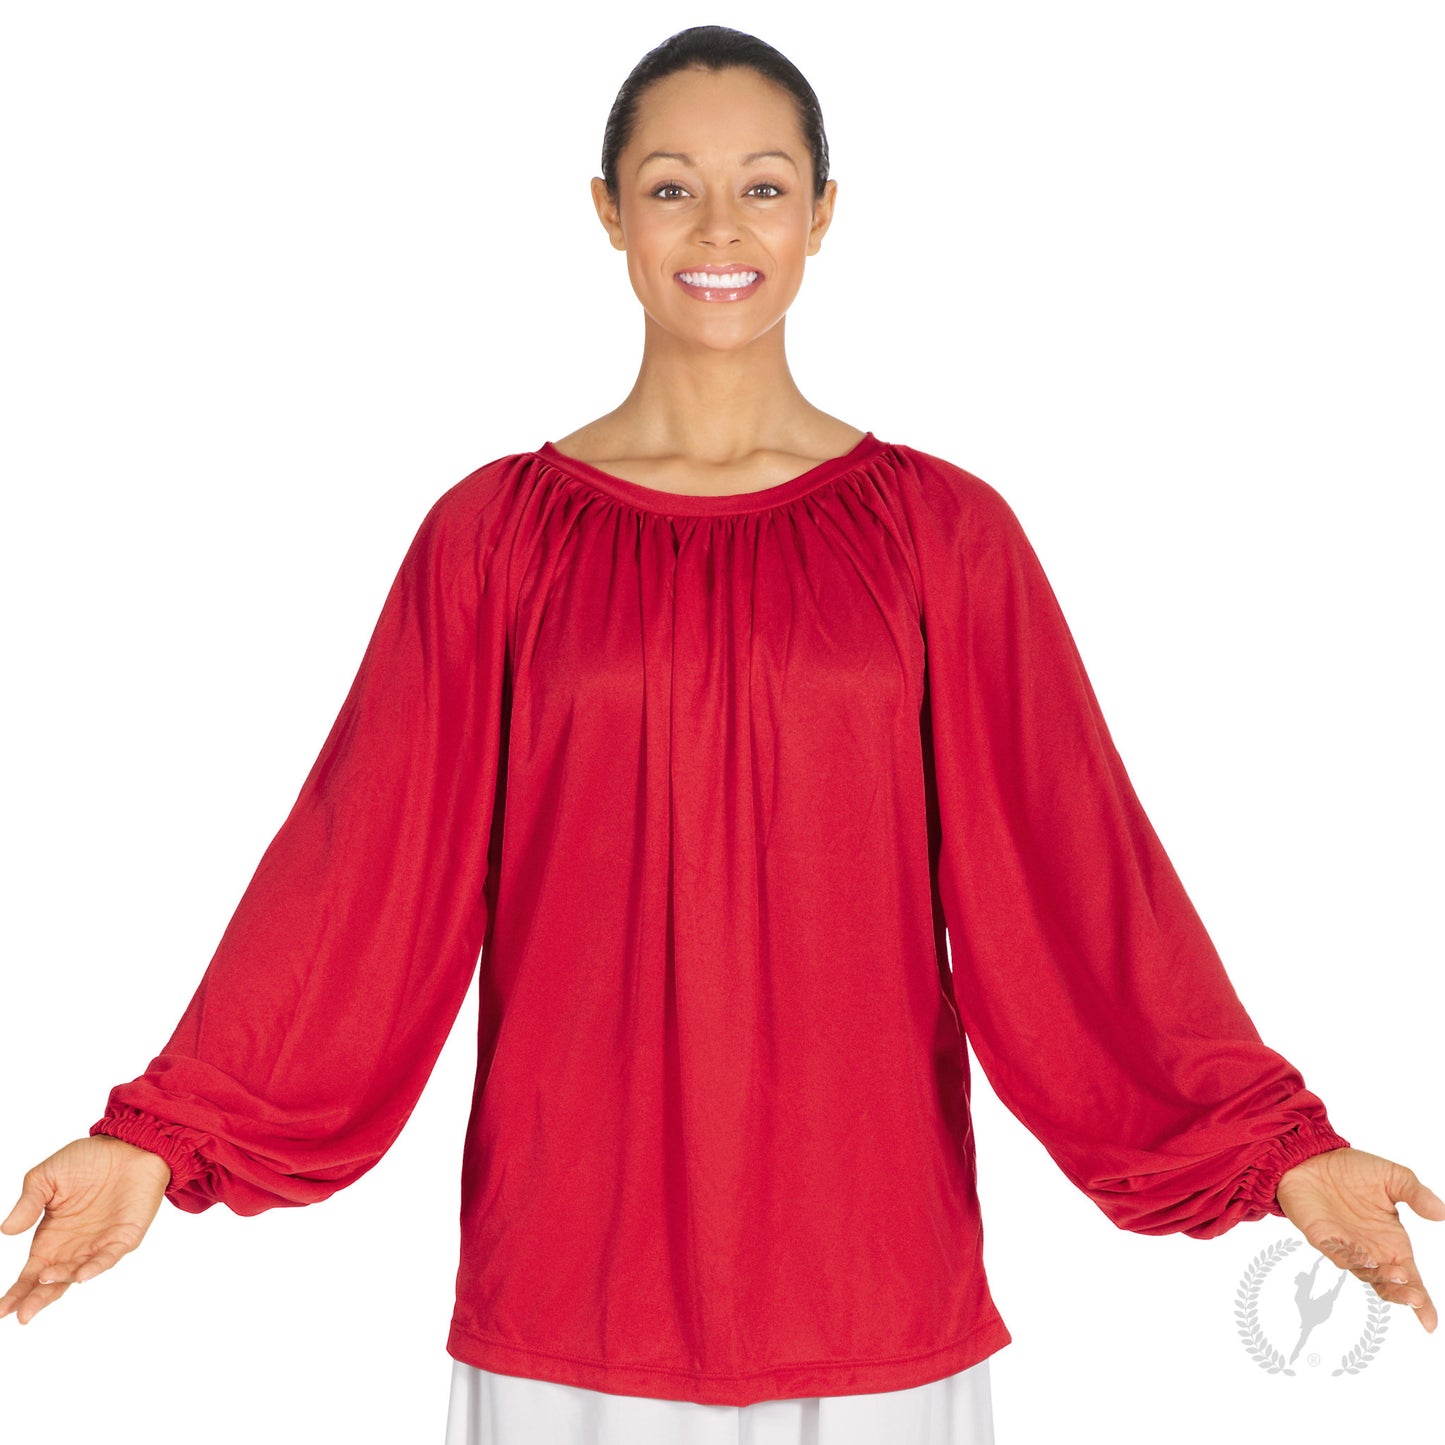 13673_red_prasietop_front